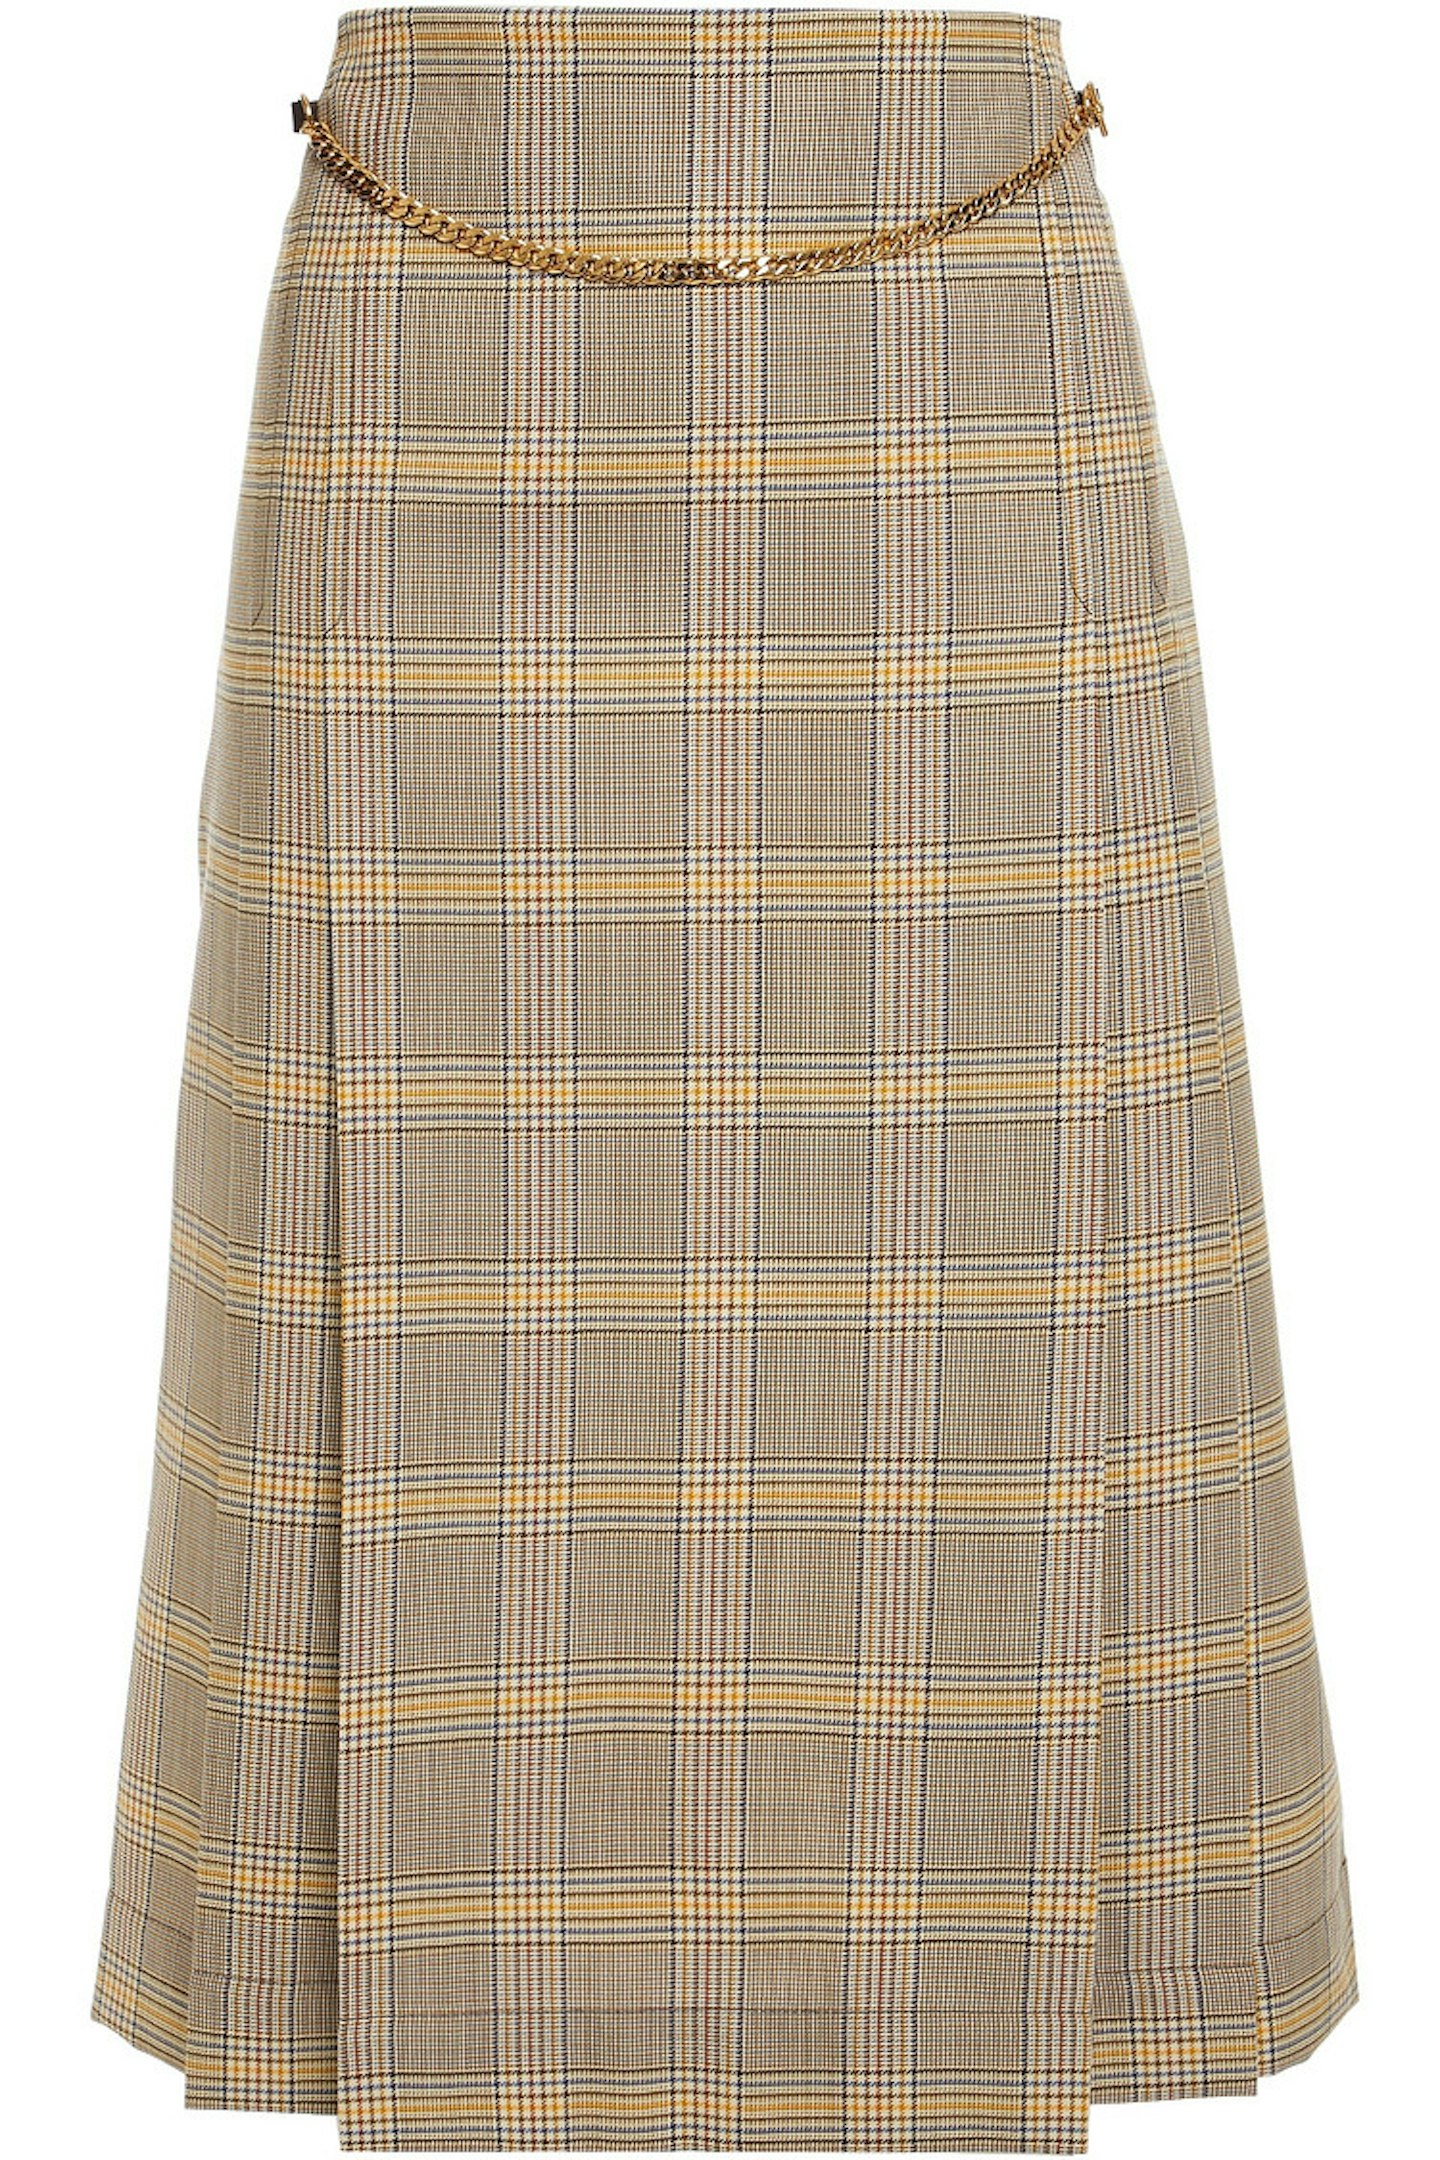 Victoria Beckham at The Outnet, Chain-trimmed pleated checked wool skirt, £395